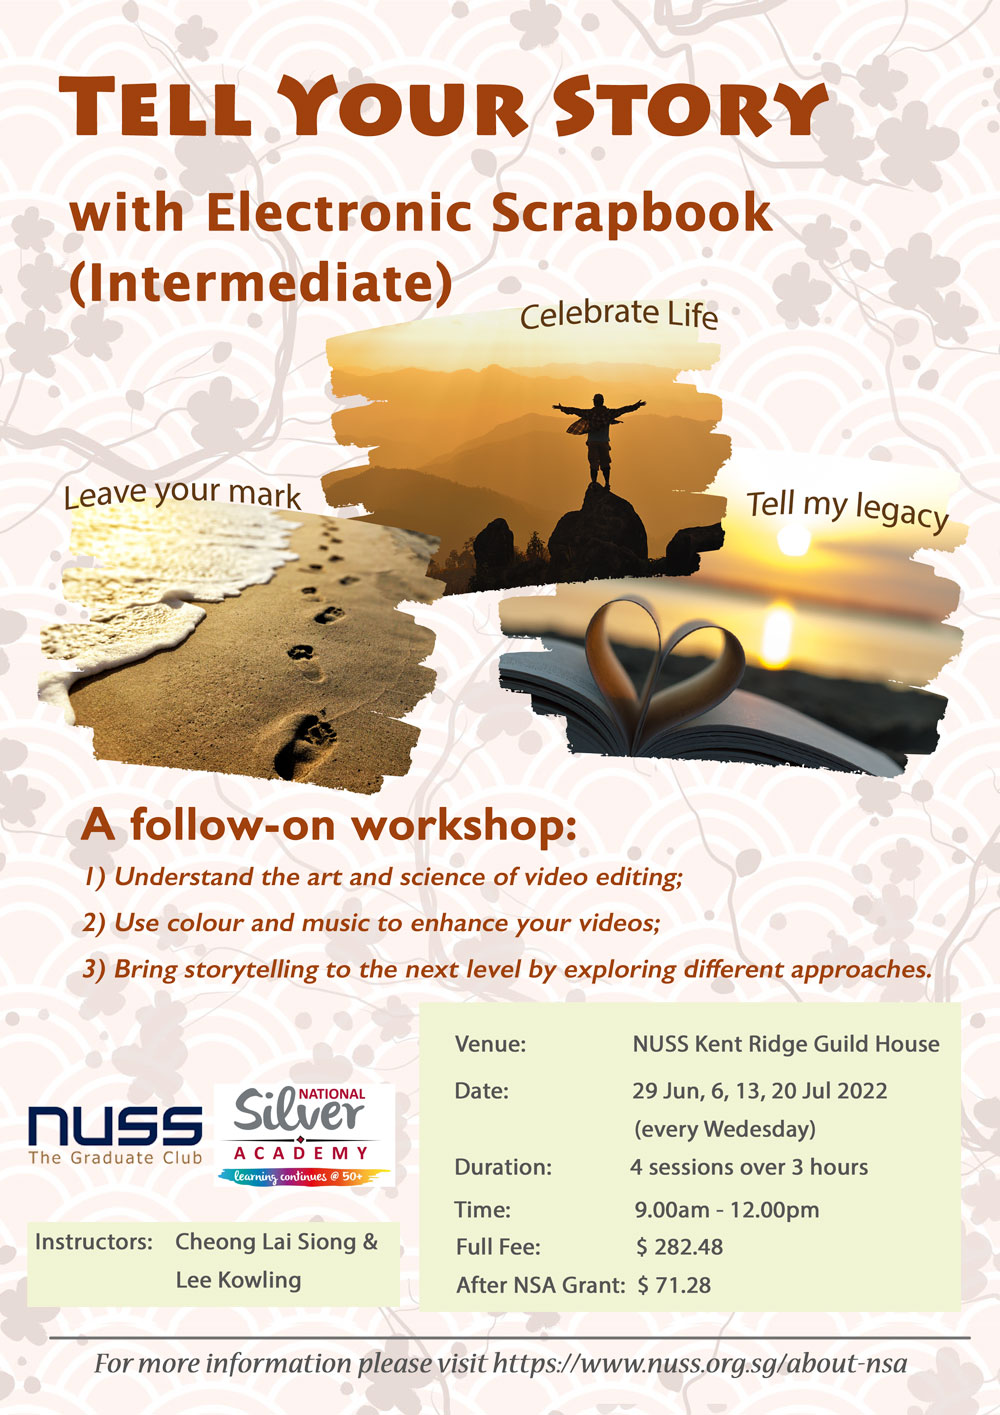 Tell Your Story with eScrapbook - Intermediate at NUSS